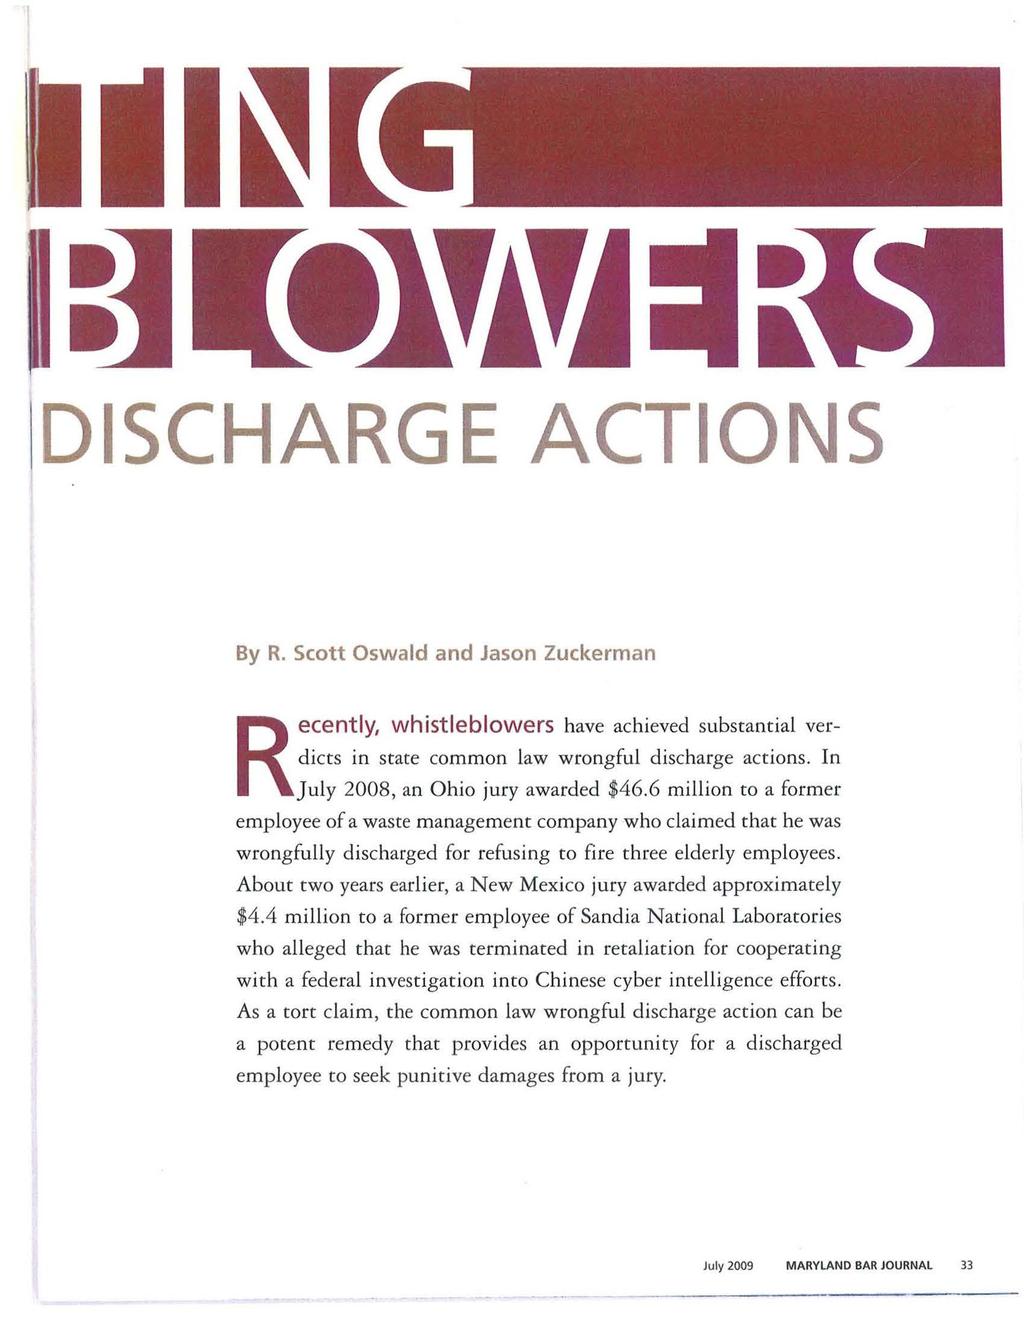 DISCHARGE ACTIONS By R. Scott Oswald and Jason Zuckerman Recently, whistleblowers have achieved substantial verdicts in state common law wrongful discharge actions.